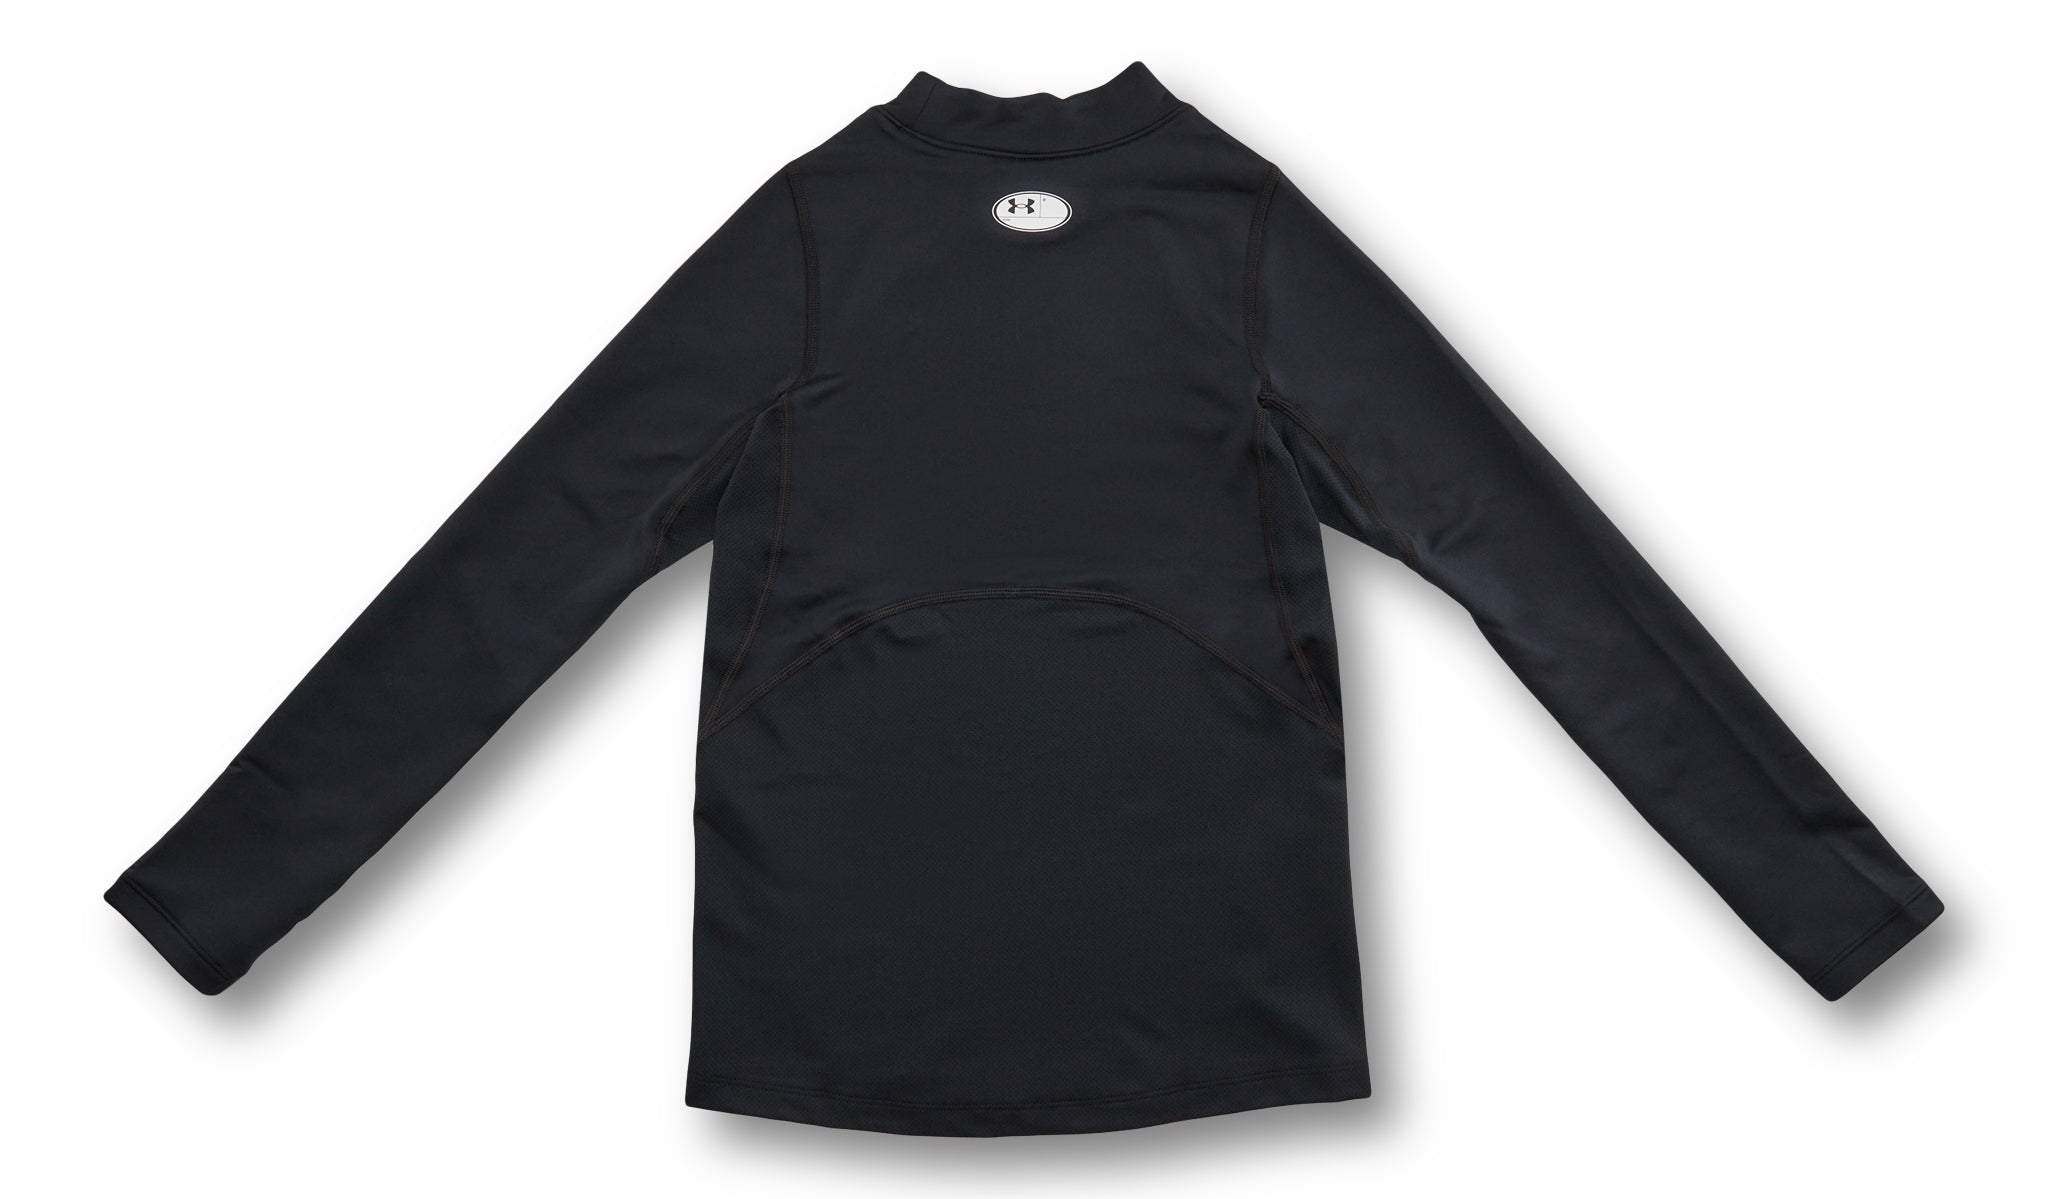 Under Armour Cold Gear Mock Long Sleeve - Youth